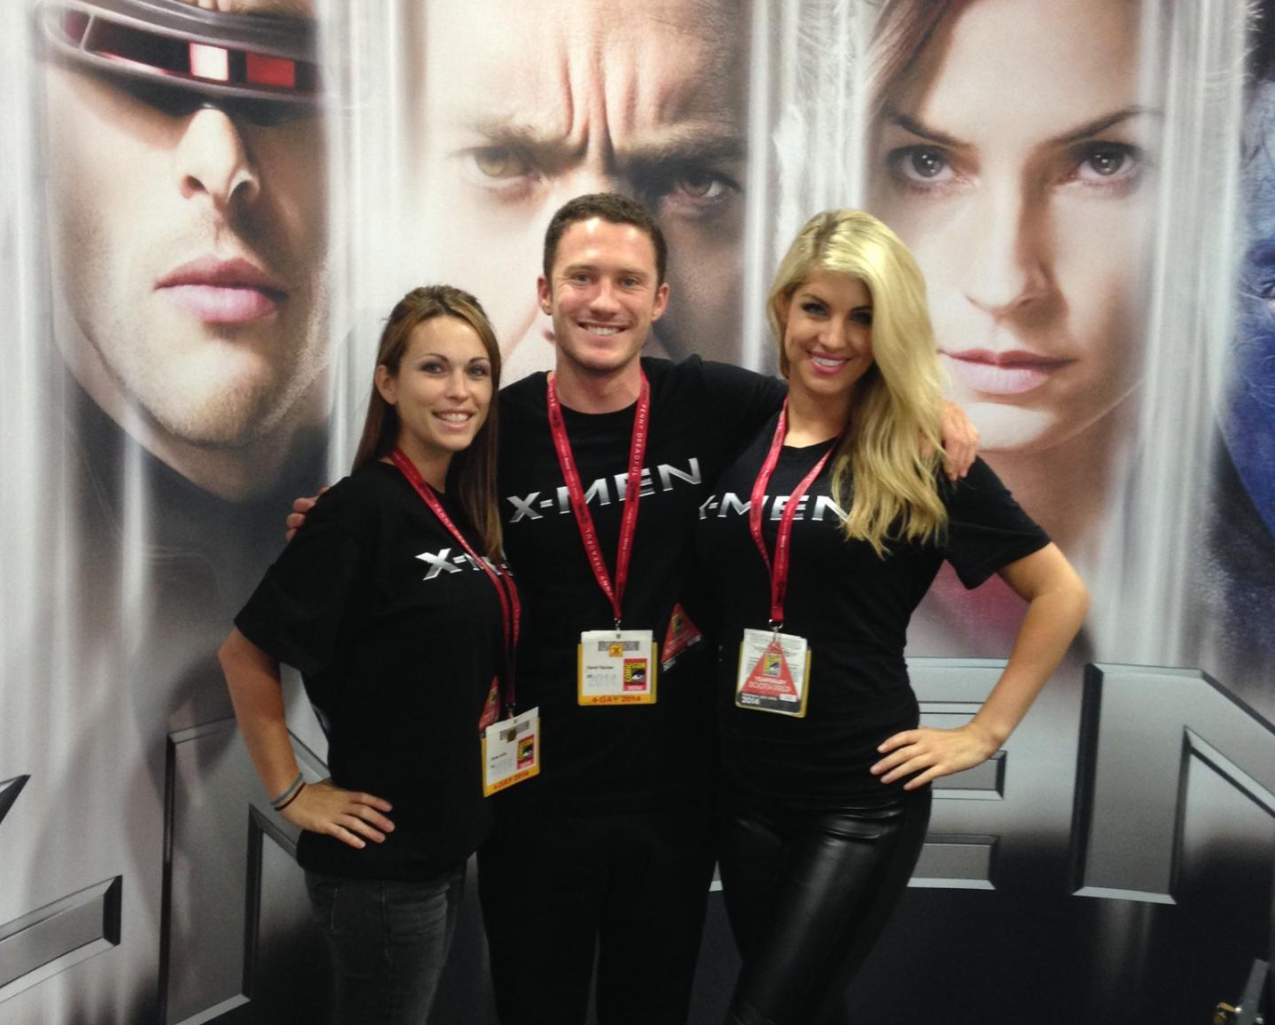 Conference staffing in Las Vegas and New York